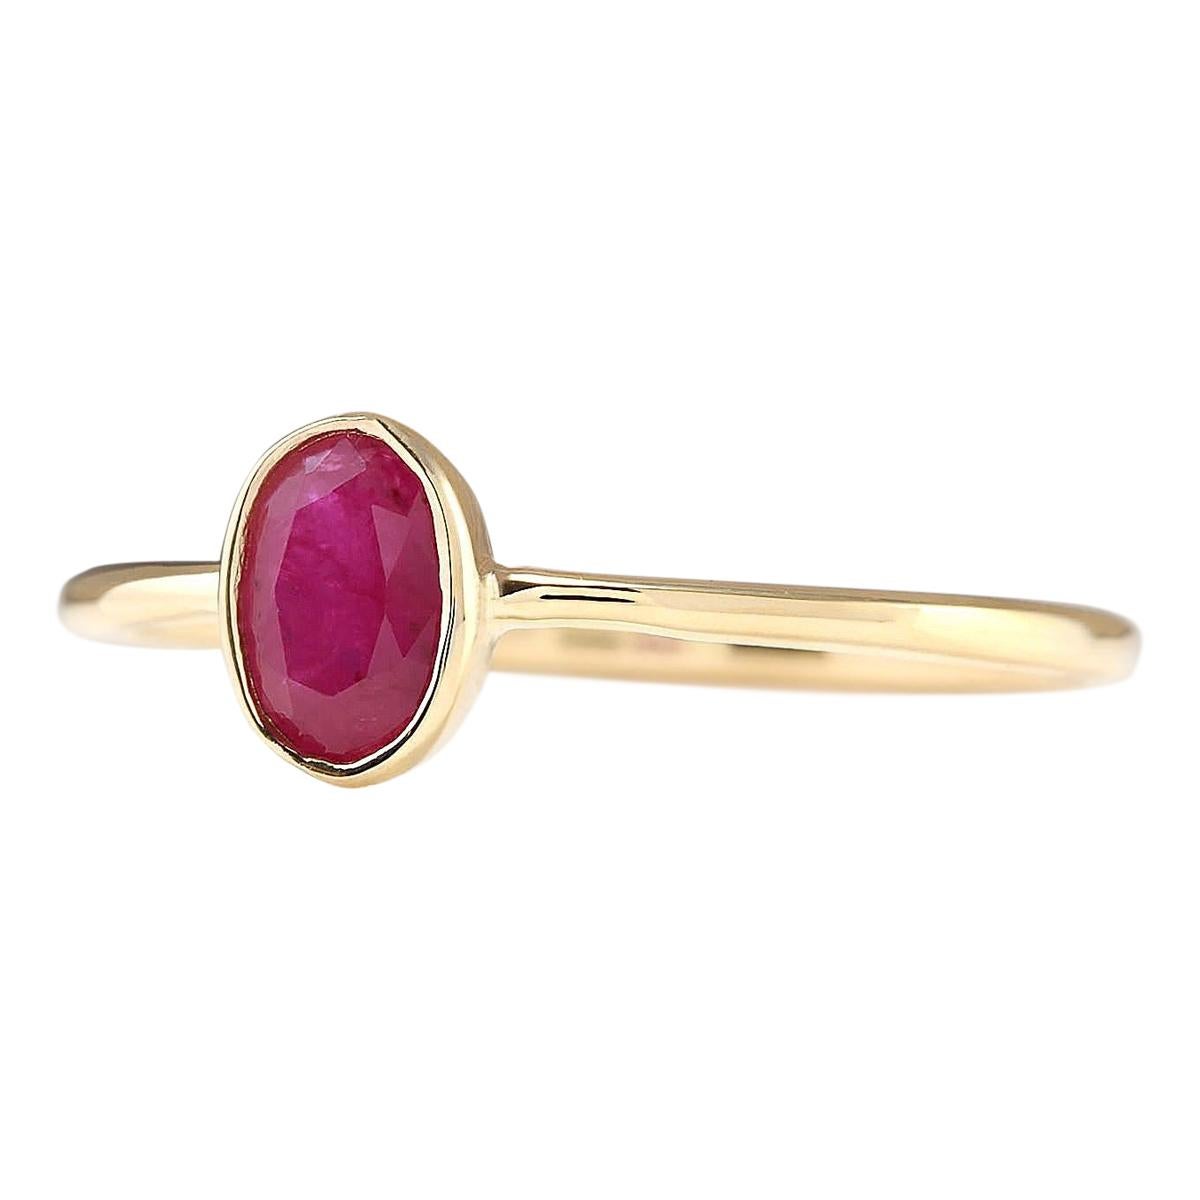 Presenting our enchanting 14 Karat Yellow Gold Ring adorned with a stunning 0.60 Carat Natural Ruby gemstone. Impeccably crafted and stamped for authenticity in 14K yellow gold, this ring exudes elegance and charm. Weighing only 1.3 grams, it offers